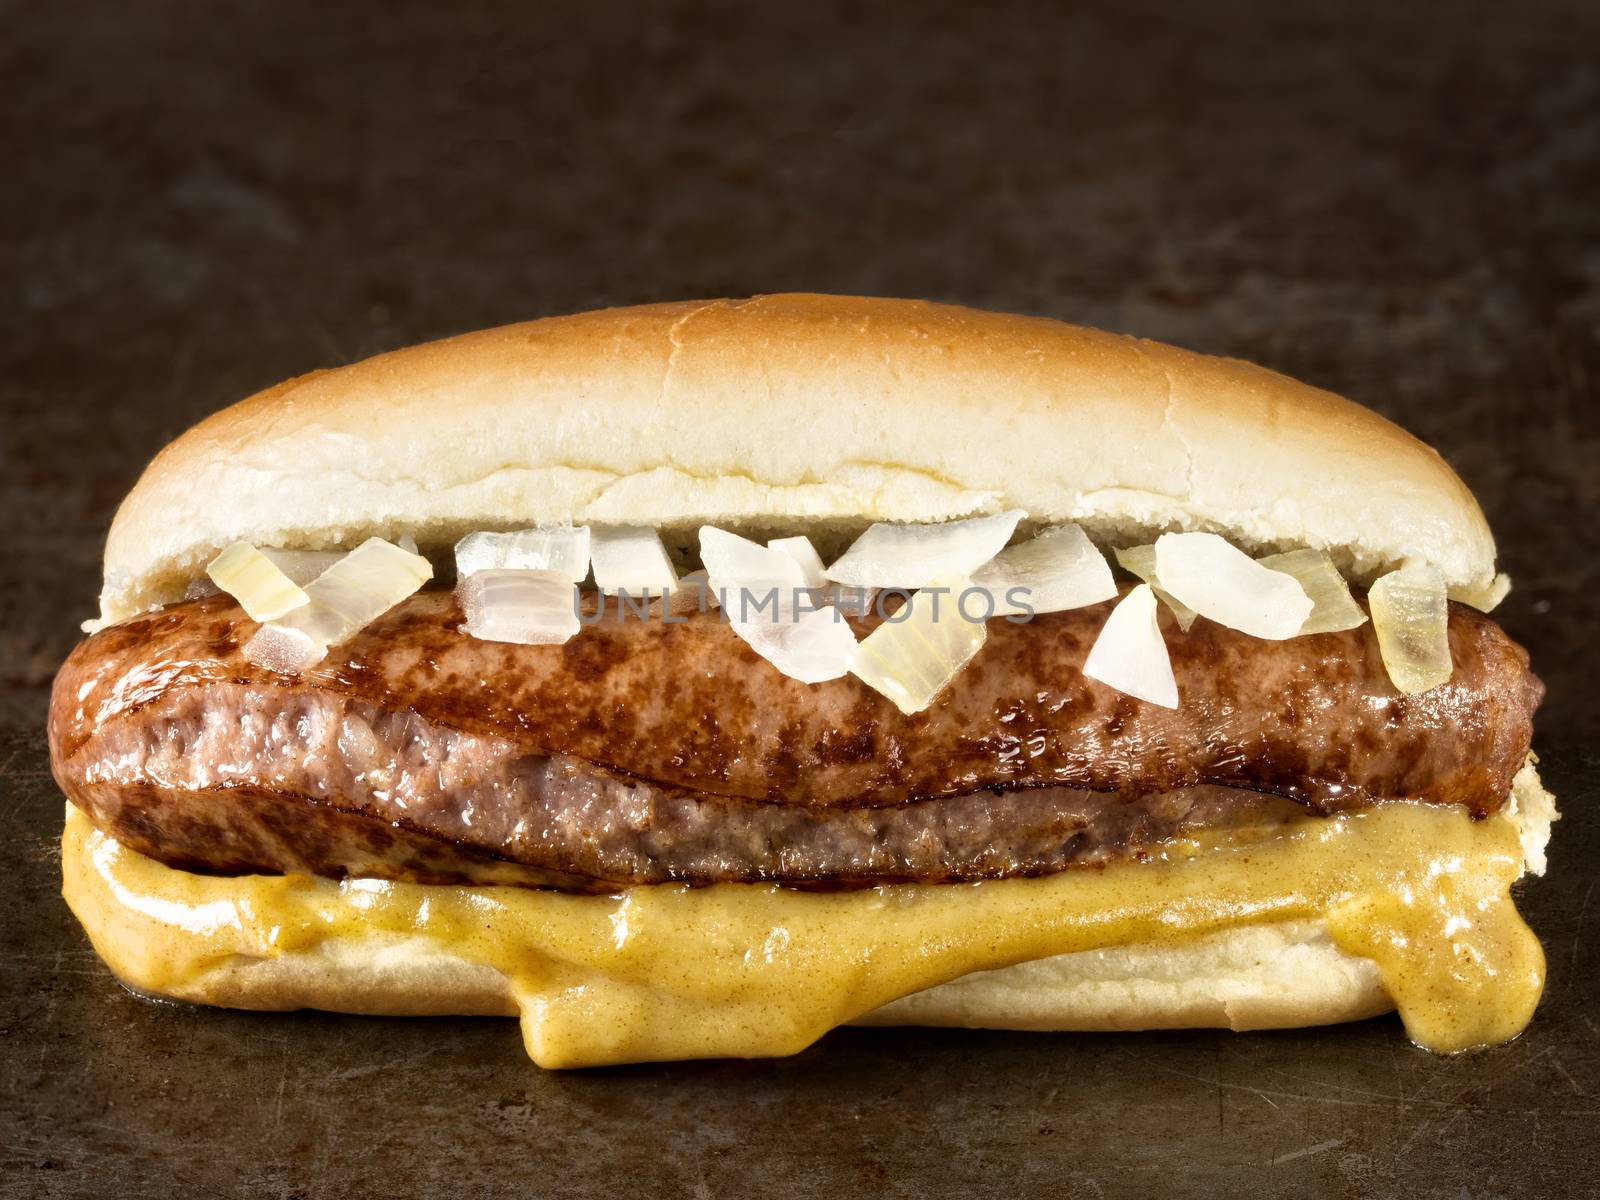 rustic american hot dog with mustard and onion by zkruger